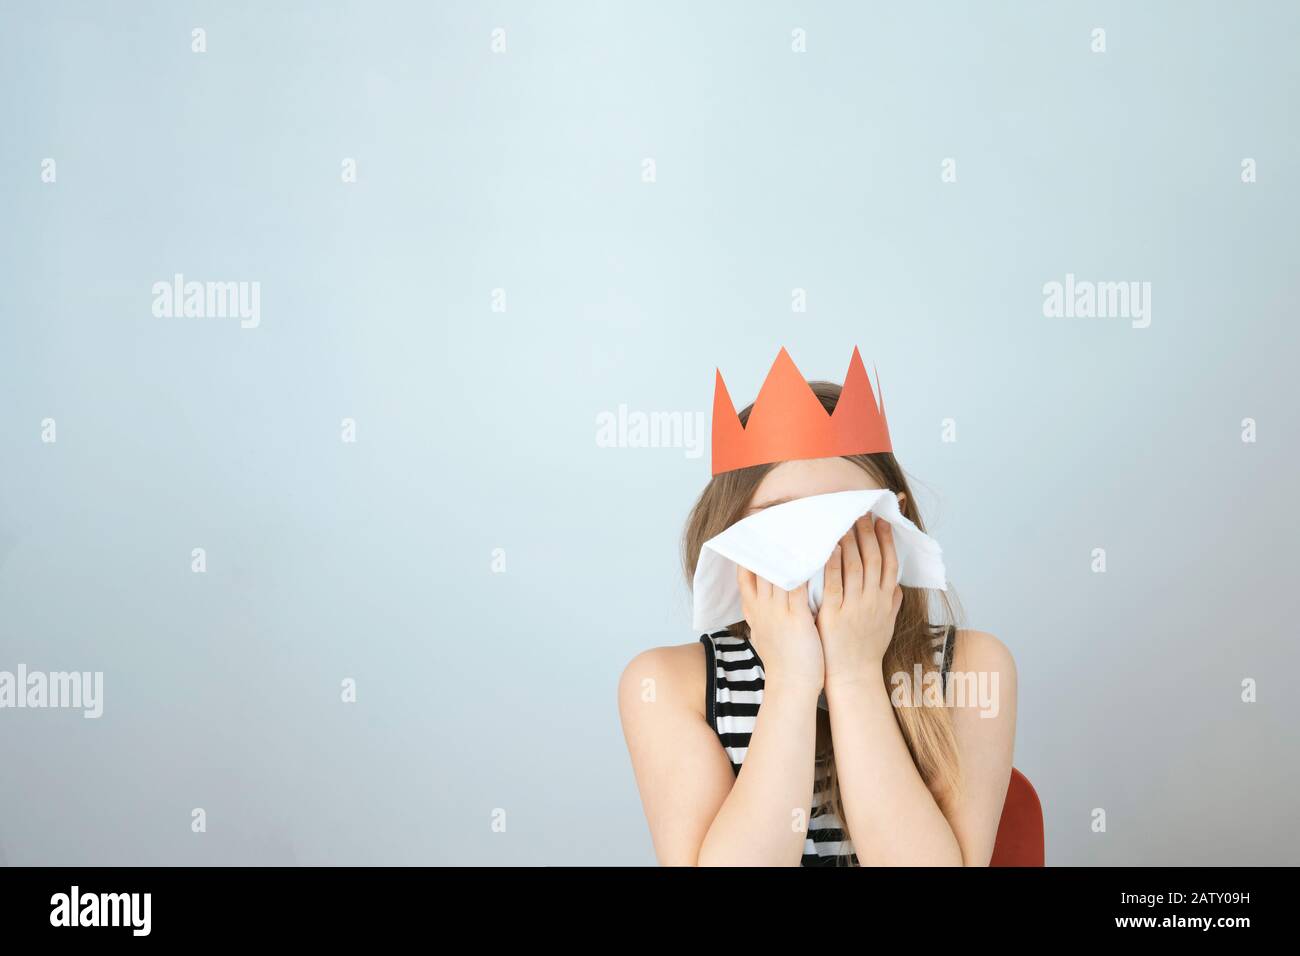 Coronavirus 2019 n-Cov concept. Girl with red crown and white handkerchief. Sars virus. Background with copyspace. Stock photo. Stock Photo